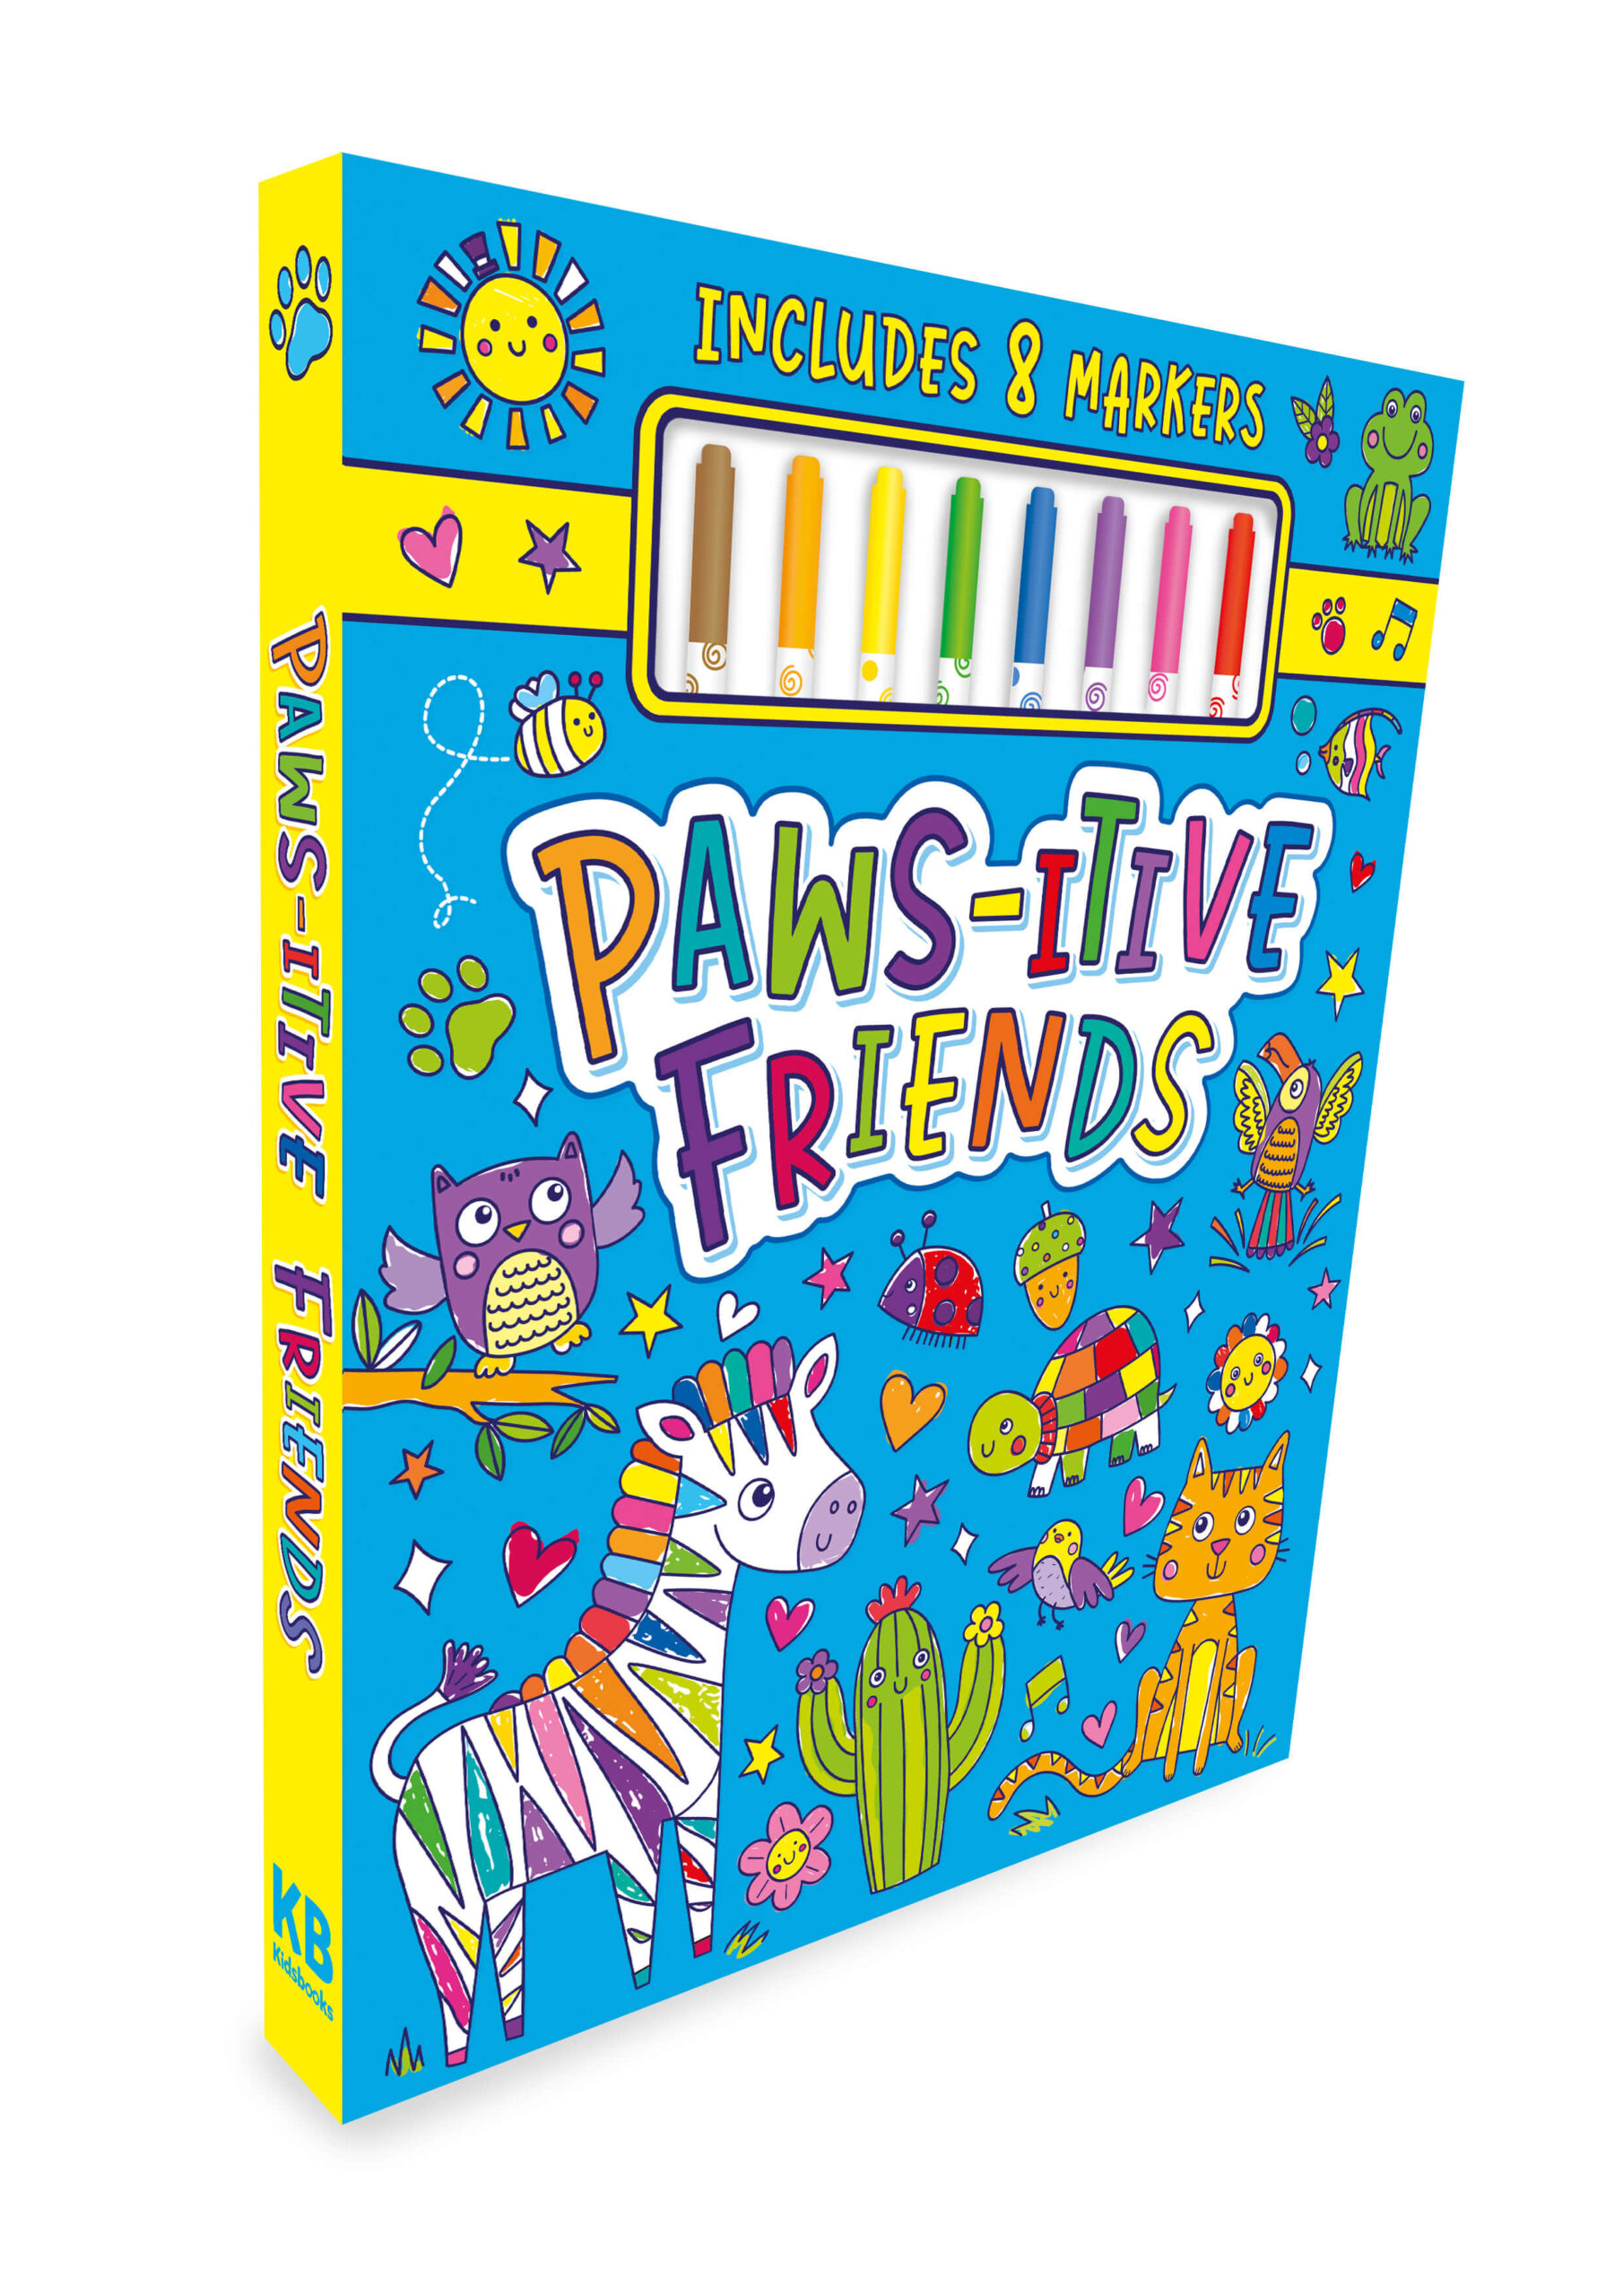 Paws-itive Friends: Marker Activity Kit